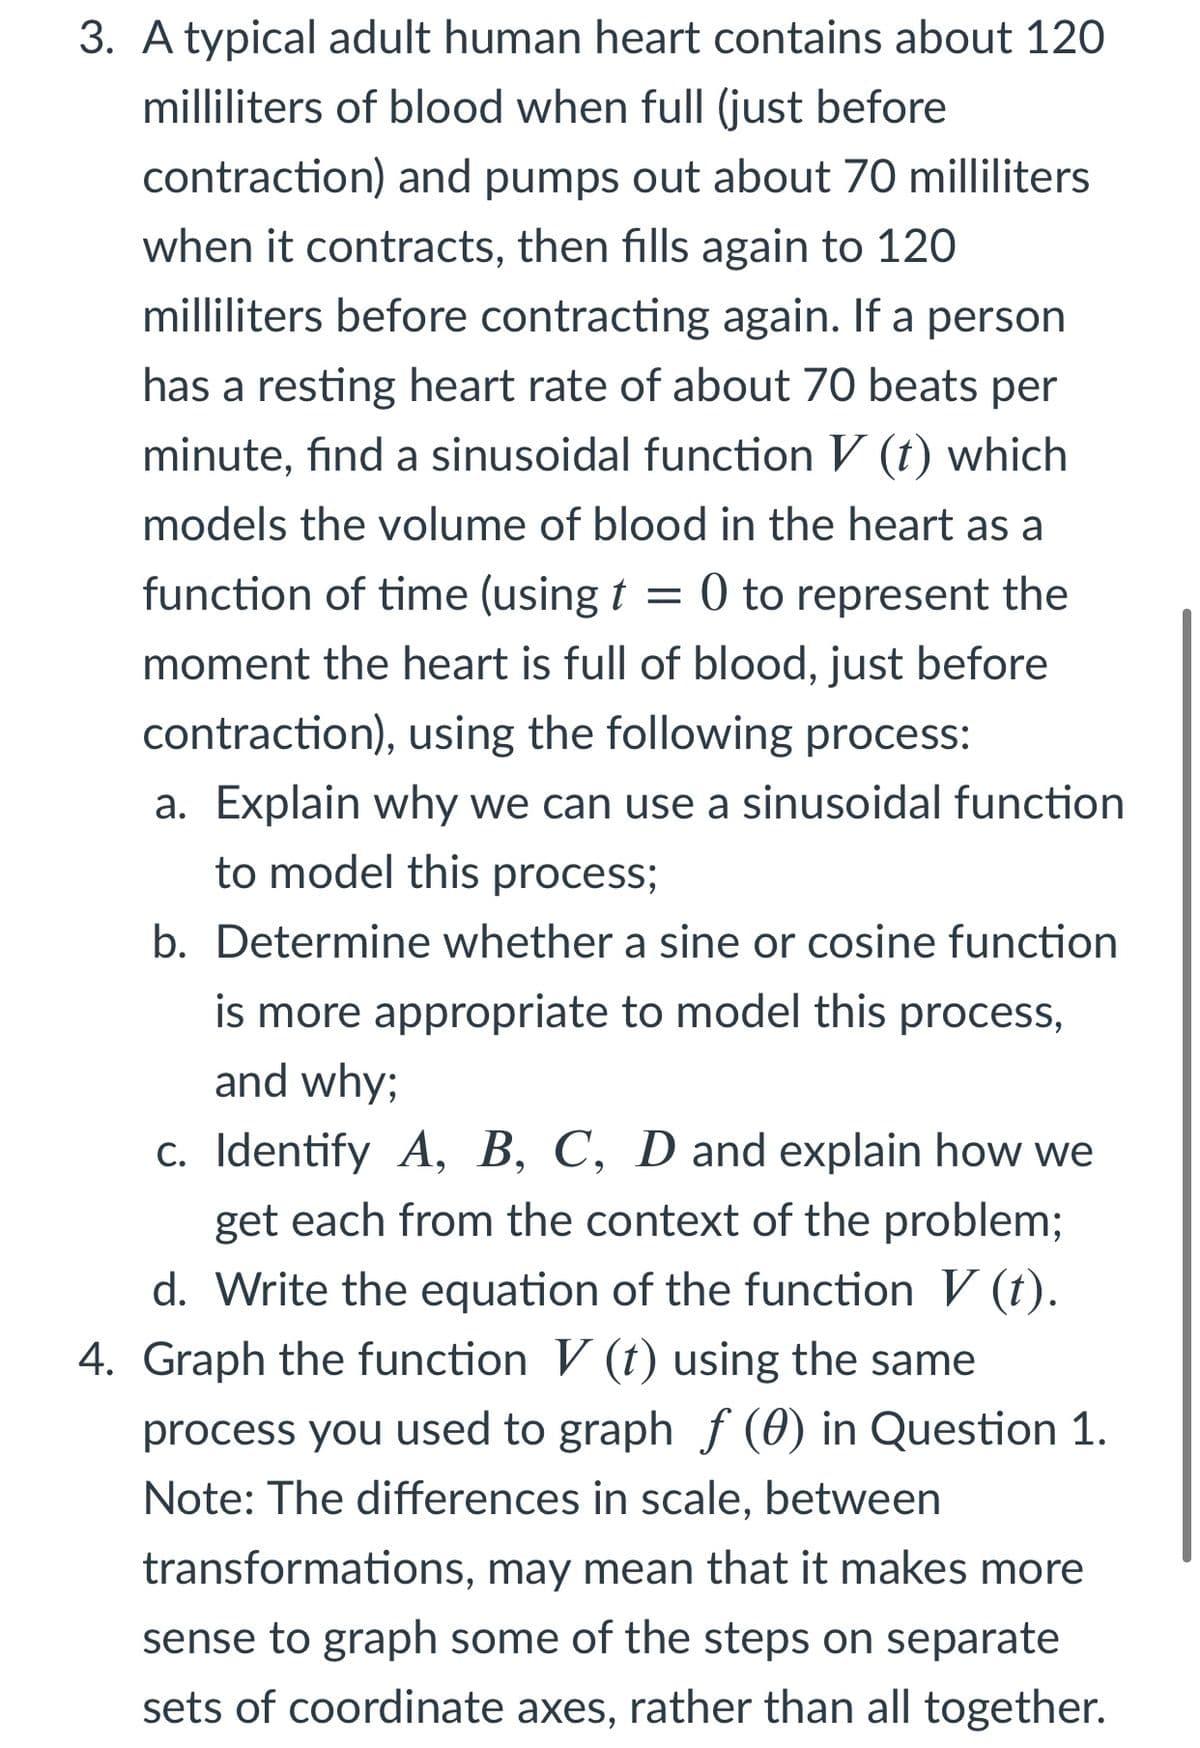 3. A typical adult human heart contains about 120
milliliters of blood when full (just before
contraction) and pumps out about 70 milliliters
when it contracts, then fills again to 120
milliliters before contracting again. If a person
has a resting heart rate of about 70 beats per
minute, find a sinusoidal function V (t) which
models the volume of blood in the heart as a
function of time (using t = 0 to represent the
moment the heart is full of blood, just before
contraction), using the following process:
a. Explain why we can use a sinusoidal function
to model this process;
b. Determine whether a sine or cosine function
is more appropriate to model this process,
and why;
c. Identify A, B, C, D and explain how we
get each from the context of the problem;
d. Write the equation of the function V (t).
4. Graph the function V (t) using the same
process you used to graph f (0) in Question 1.
Note: The differences in scale, between
transformations, may mean that it makes more
sense to graph some of the steps on separate
sets of coordinate axes, rather than all together.
